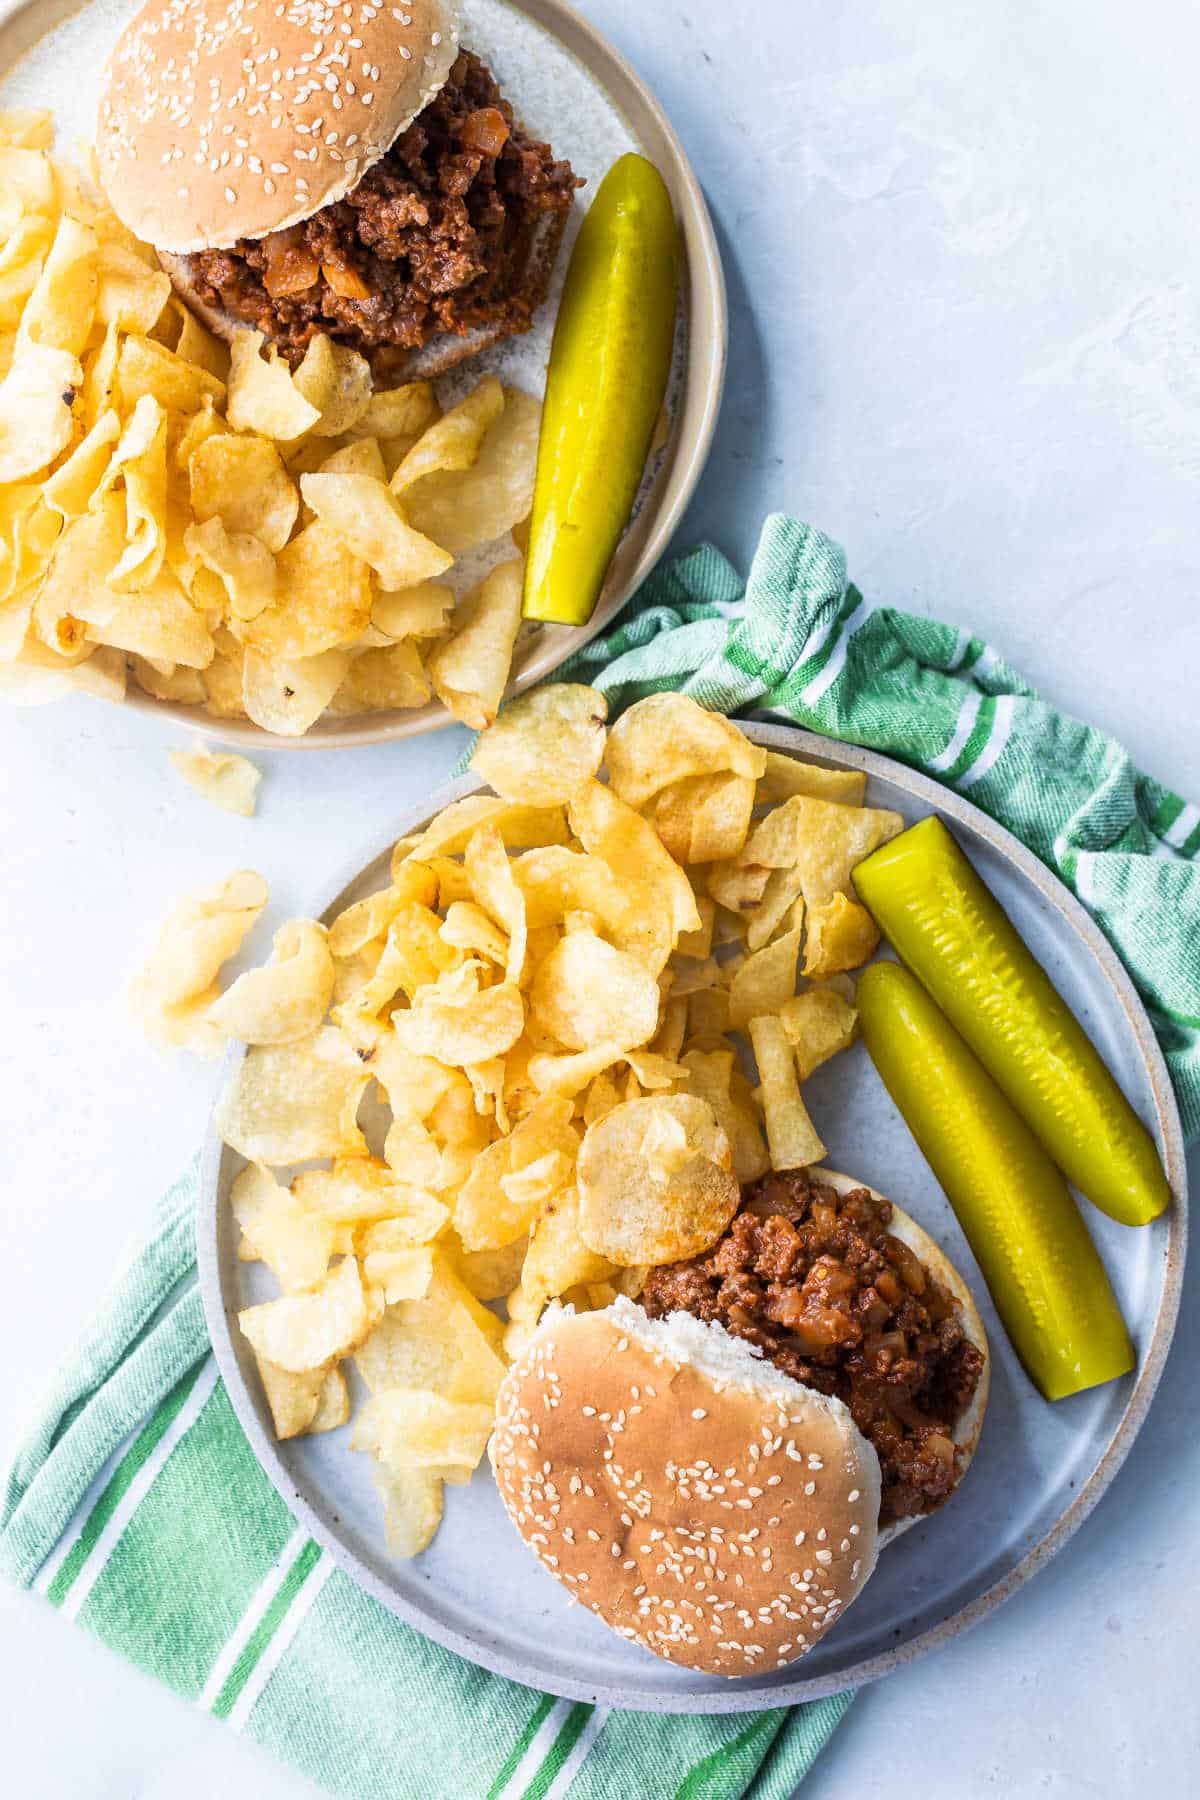 Plates of Sloppy Joes on plates with chips and pickles nearby.